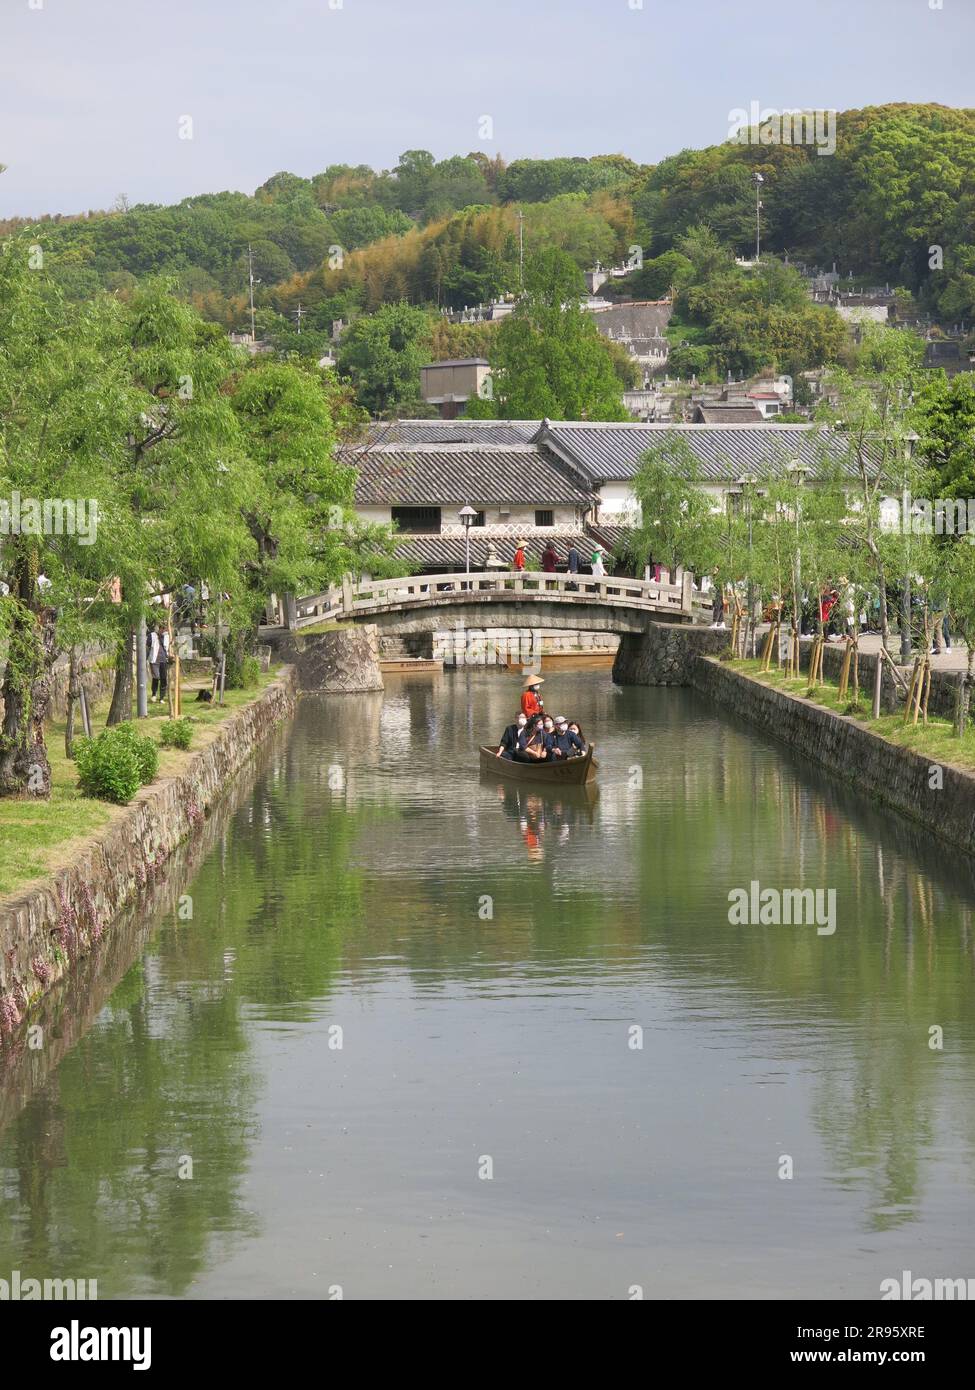 Punts with boatmen in traditional costume provide a leisurely sail along the canal for tourists to the quaint old town of Kurashiki, Japan. Stock Photo